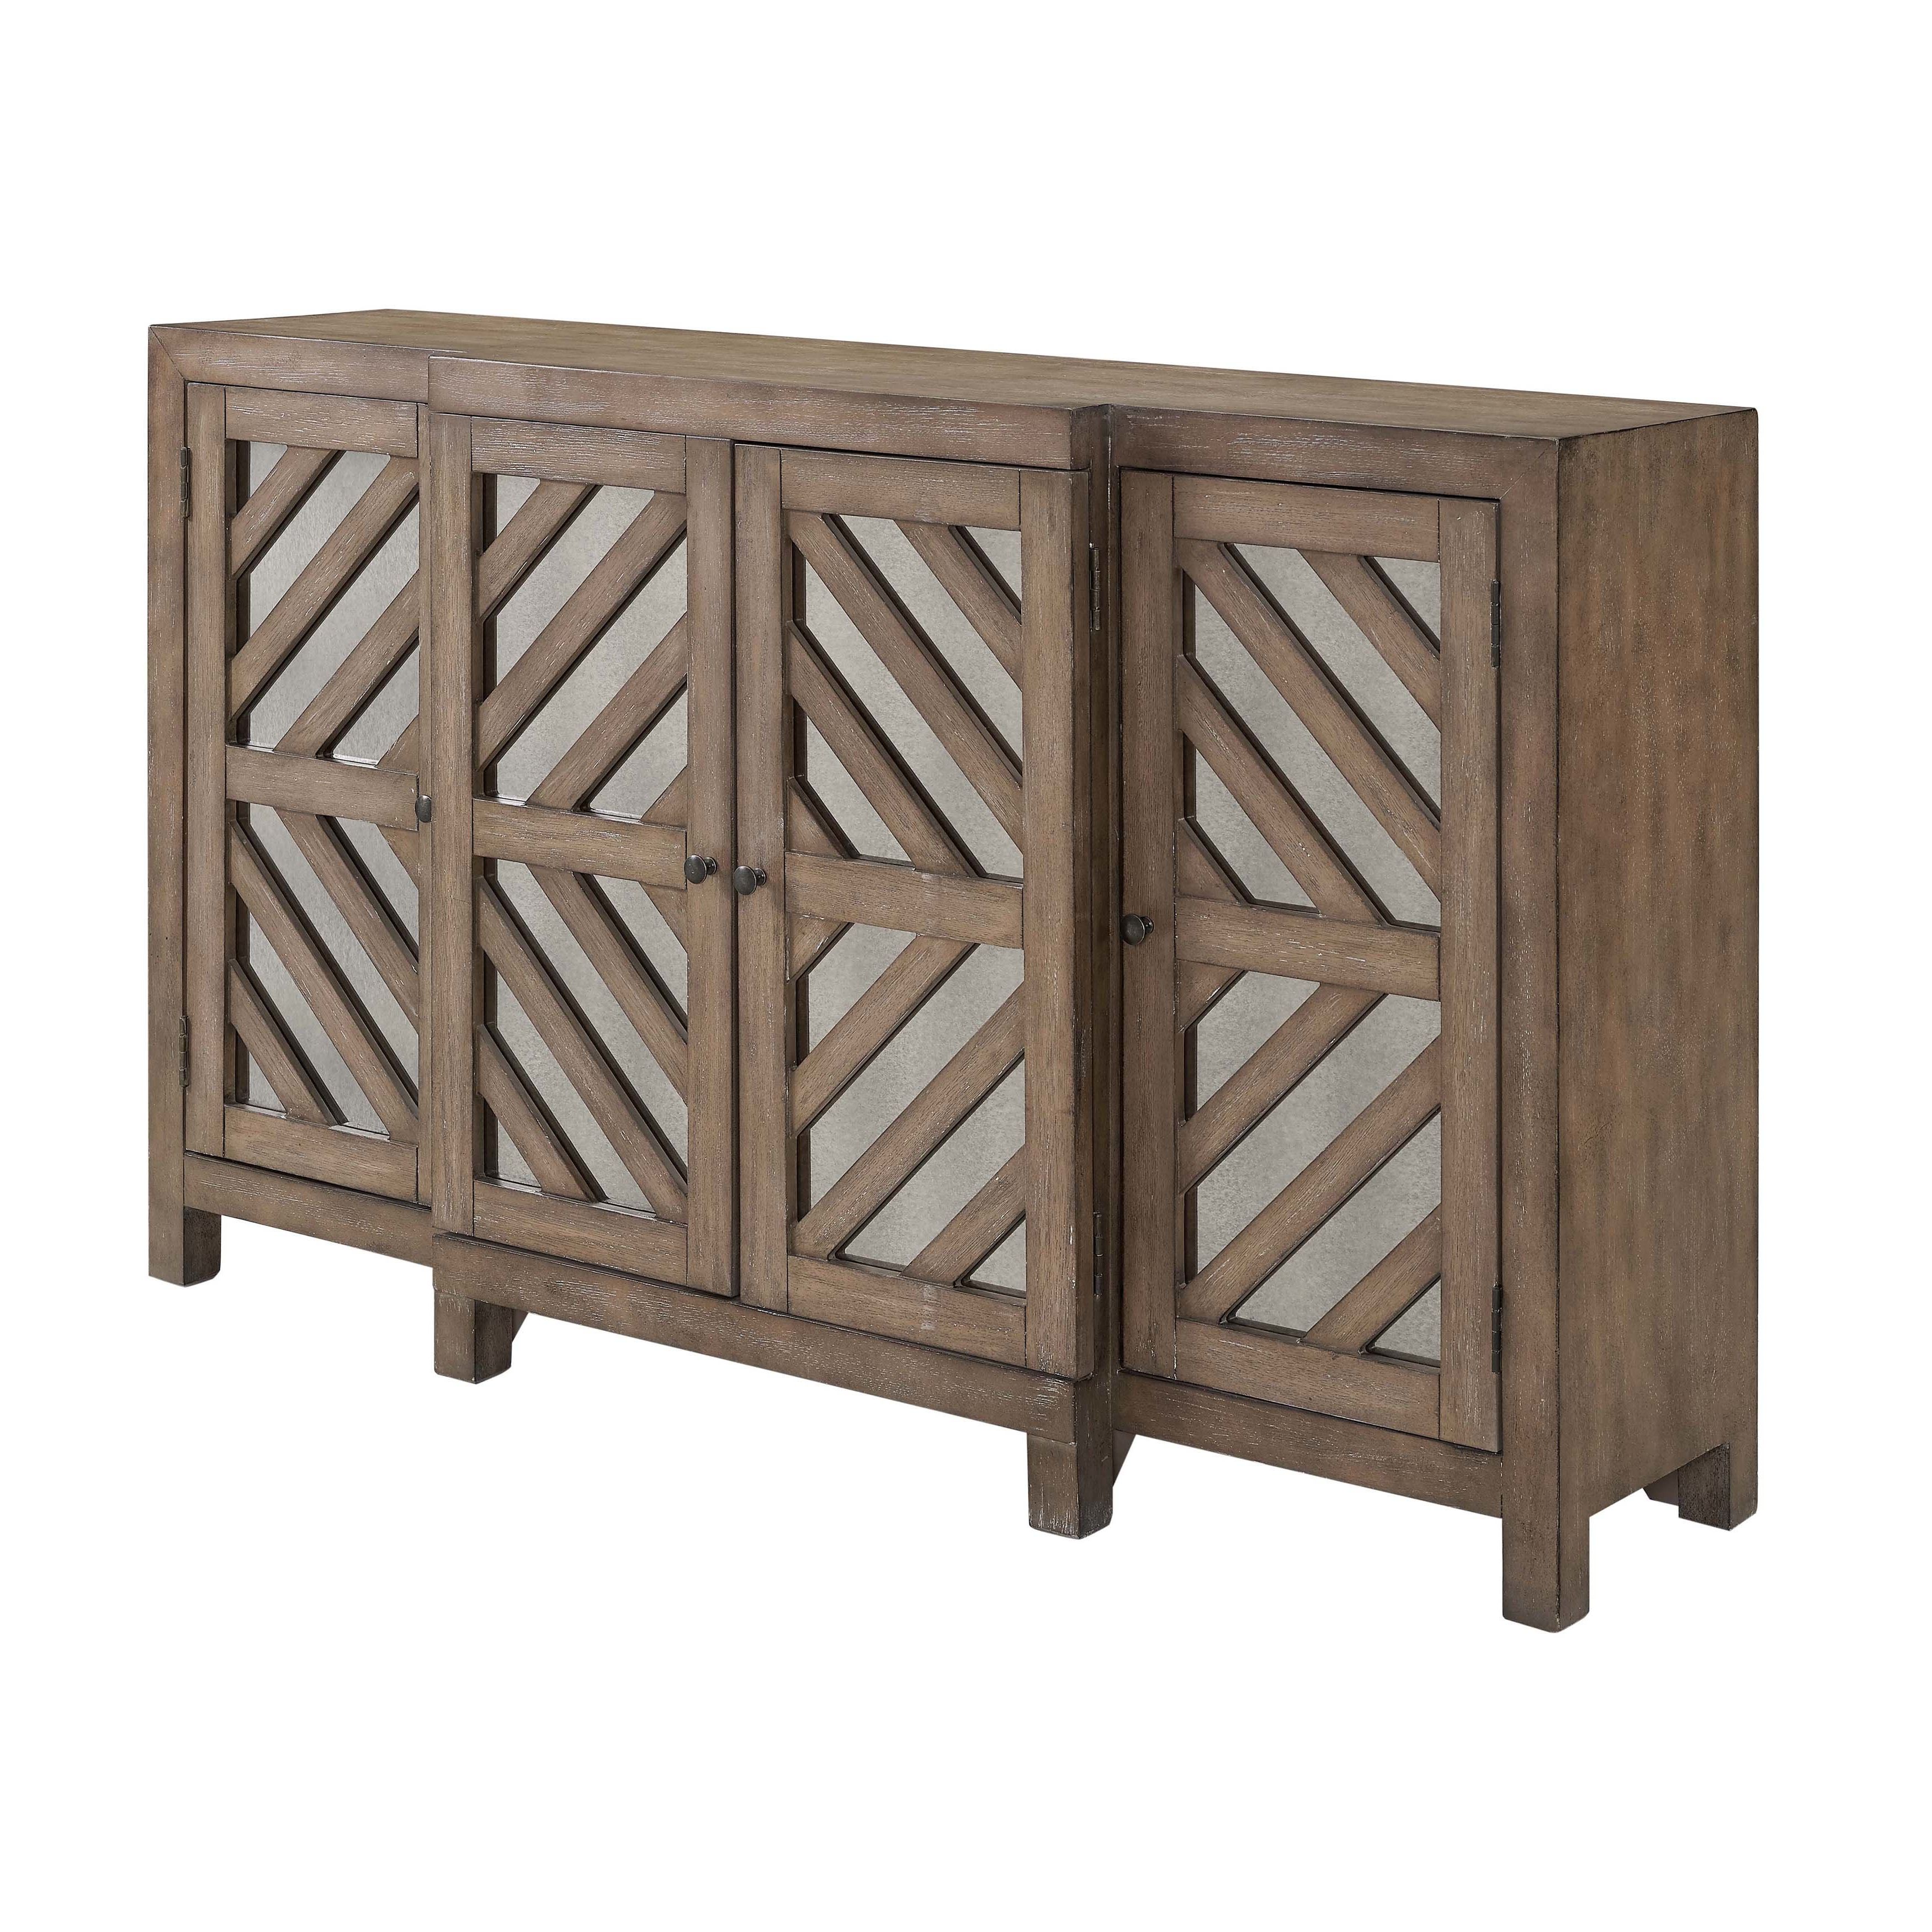 Lowrey Credenza Pertaining To Lowrey Credenzas (View 1 of 20)